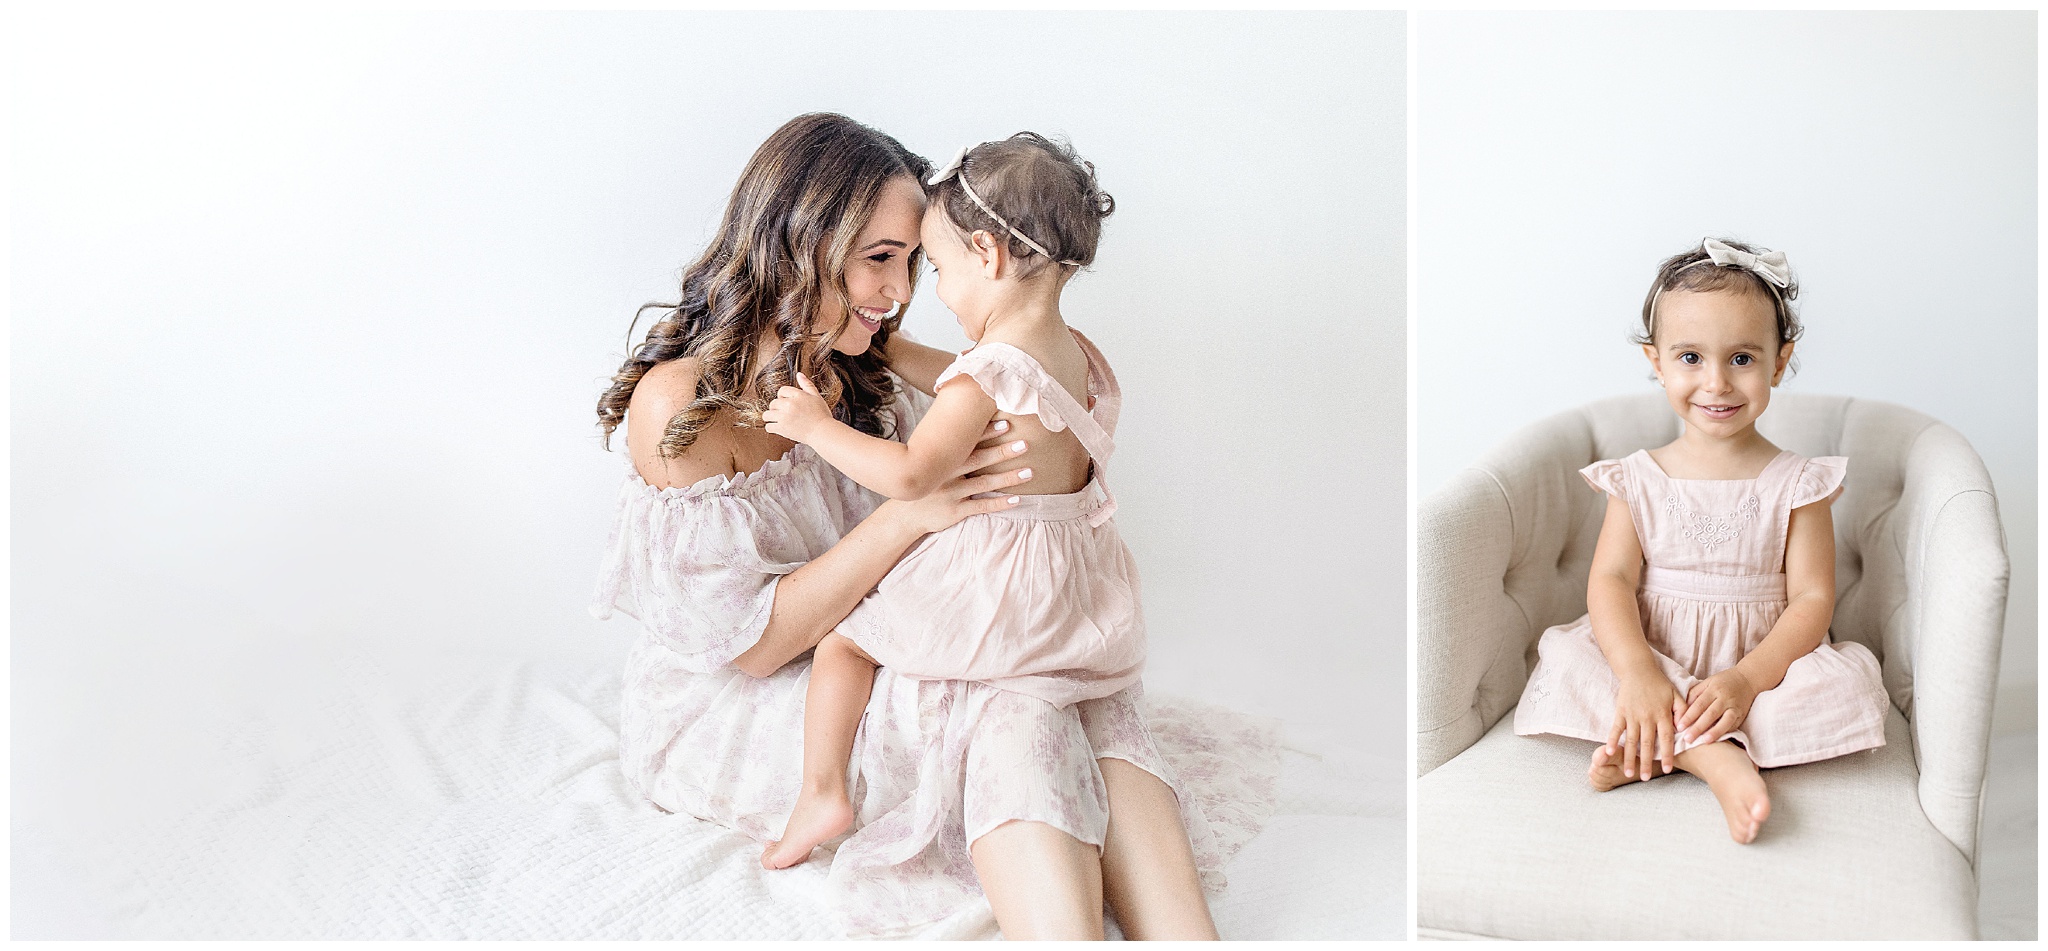 Mom snuggles daughter in Miami studio. Photo by Ivanna Vidal Photography.